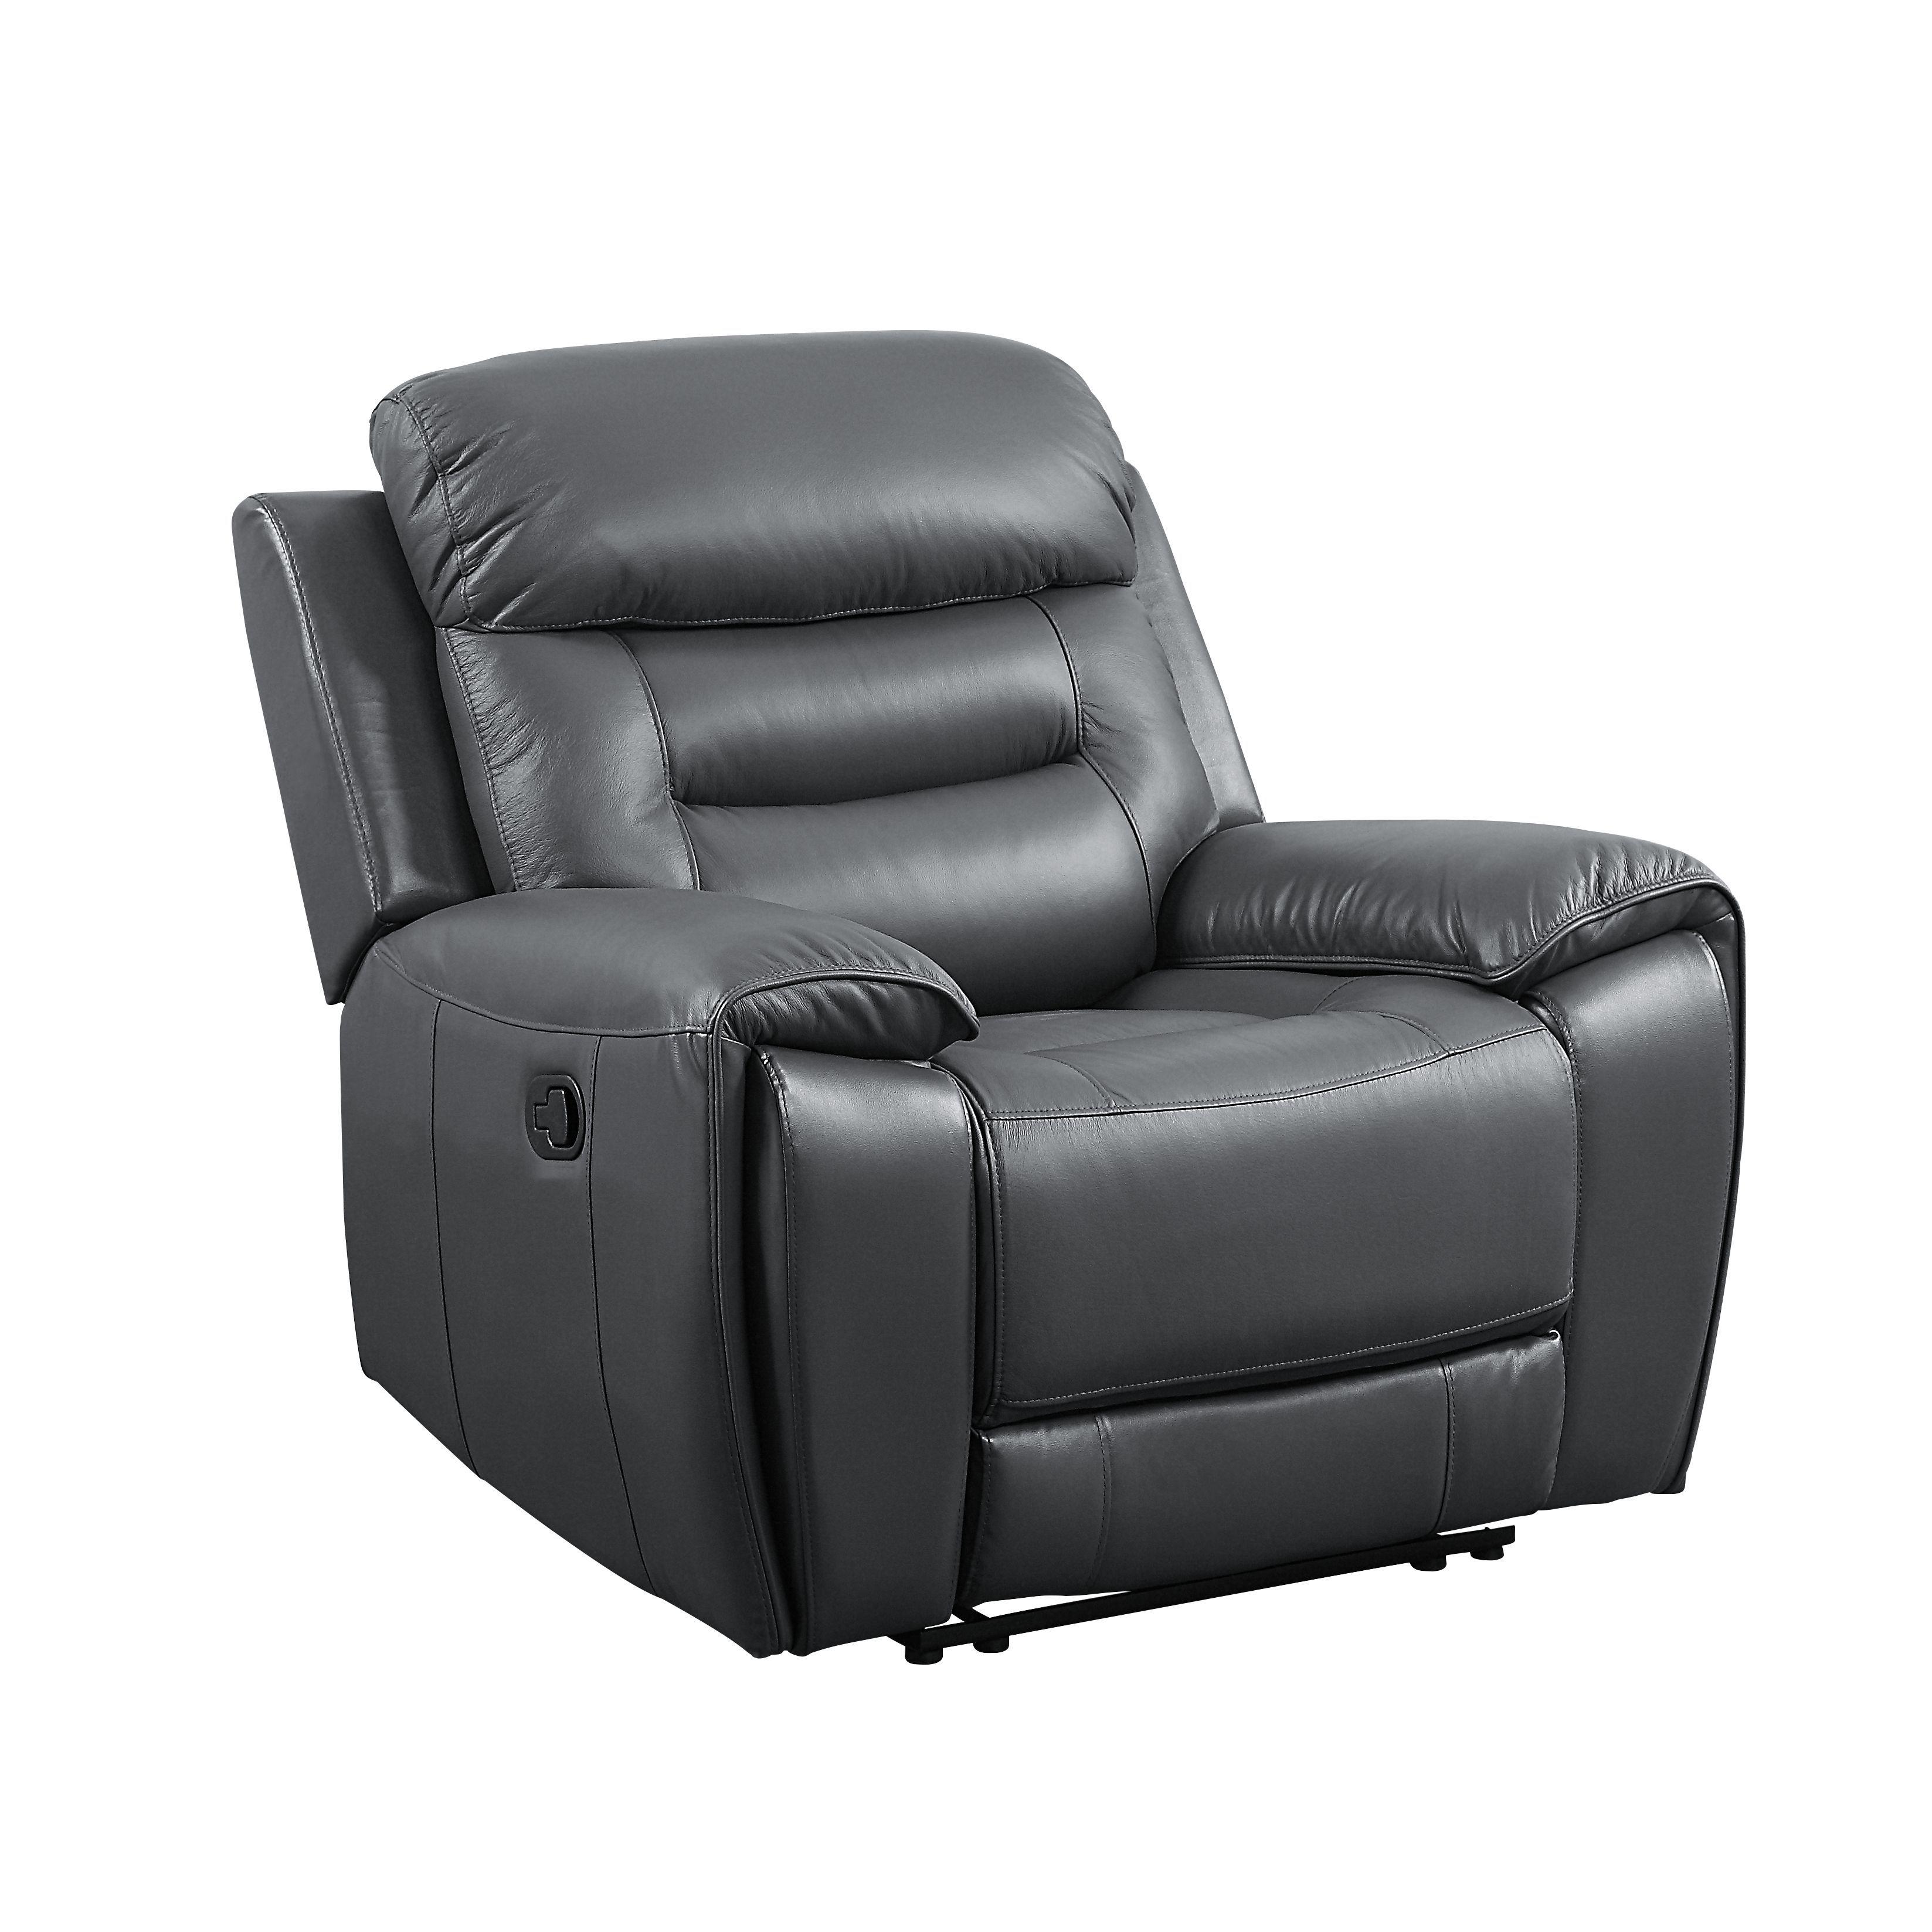 

    
Contemporary Gray Leather Recliner by Acme Lamruil LV00074
